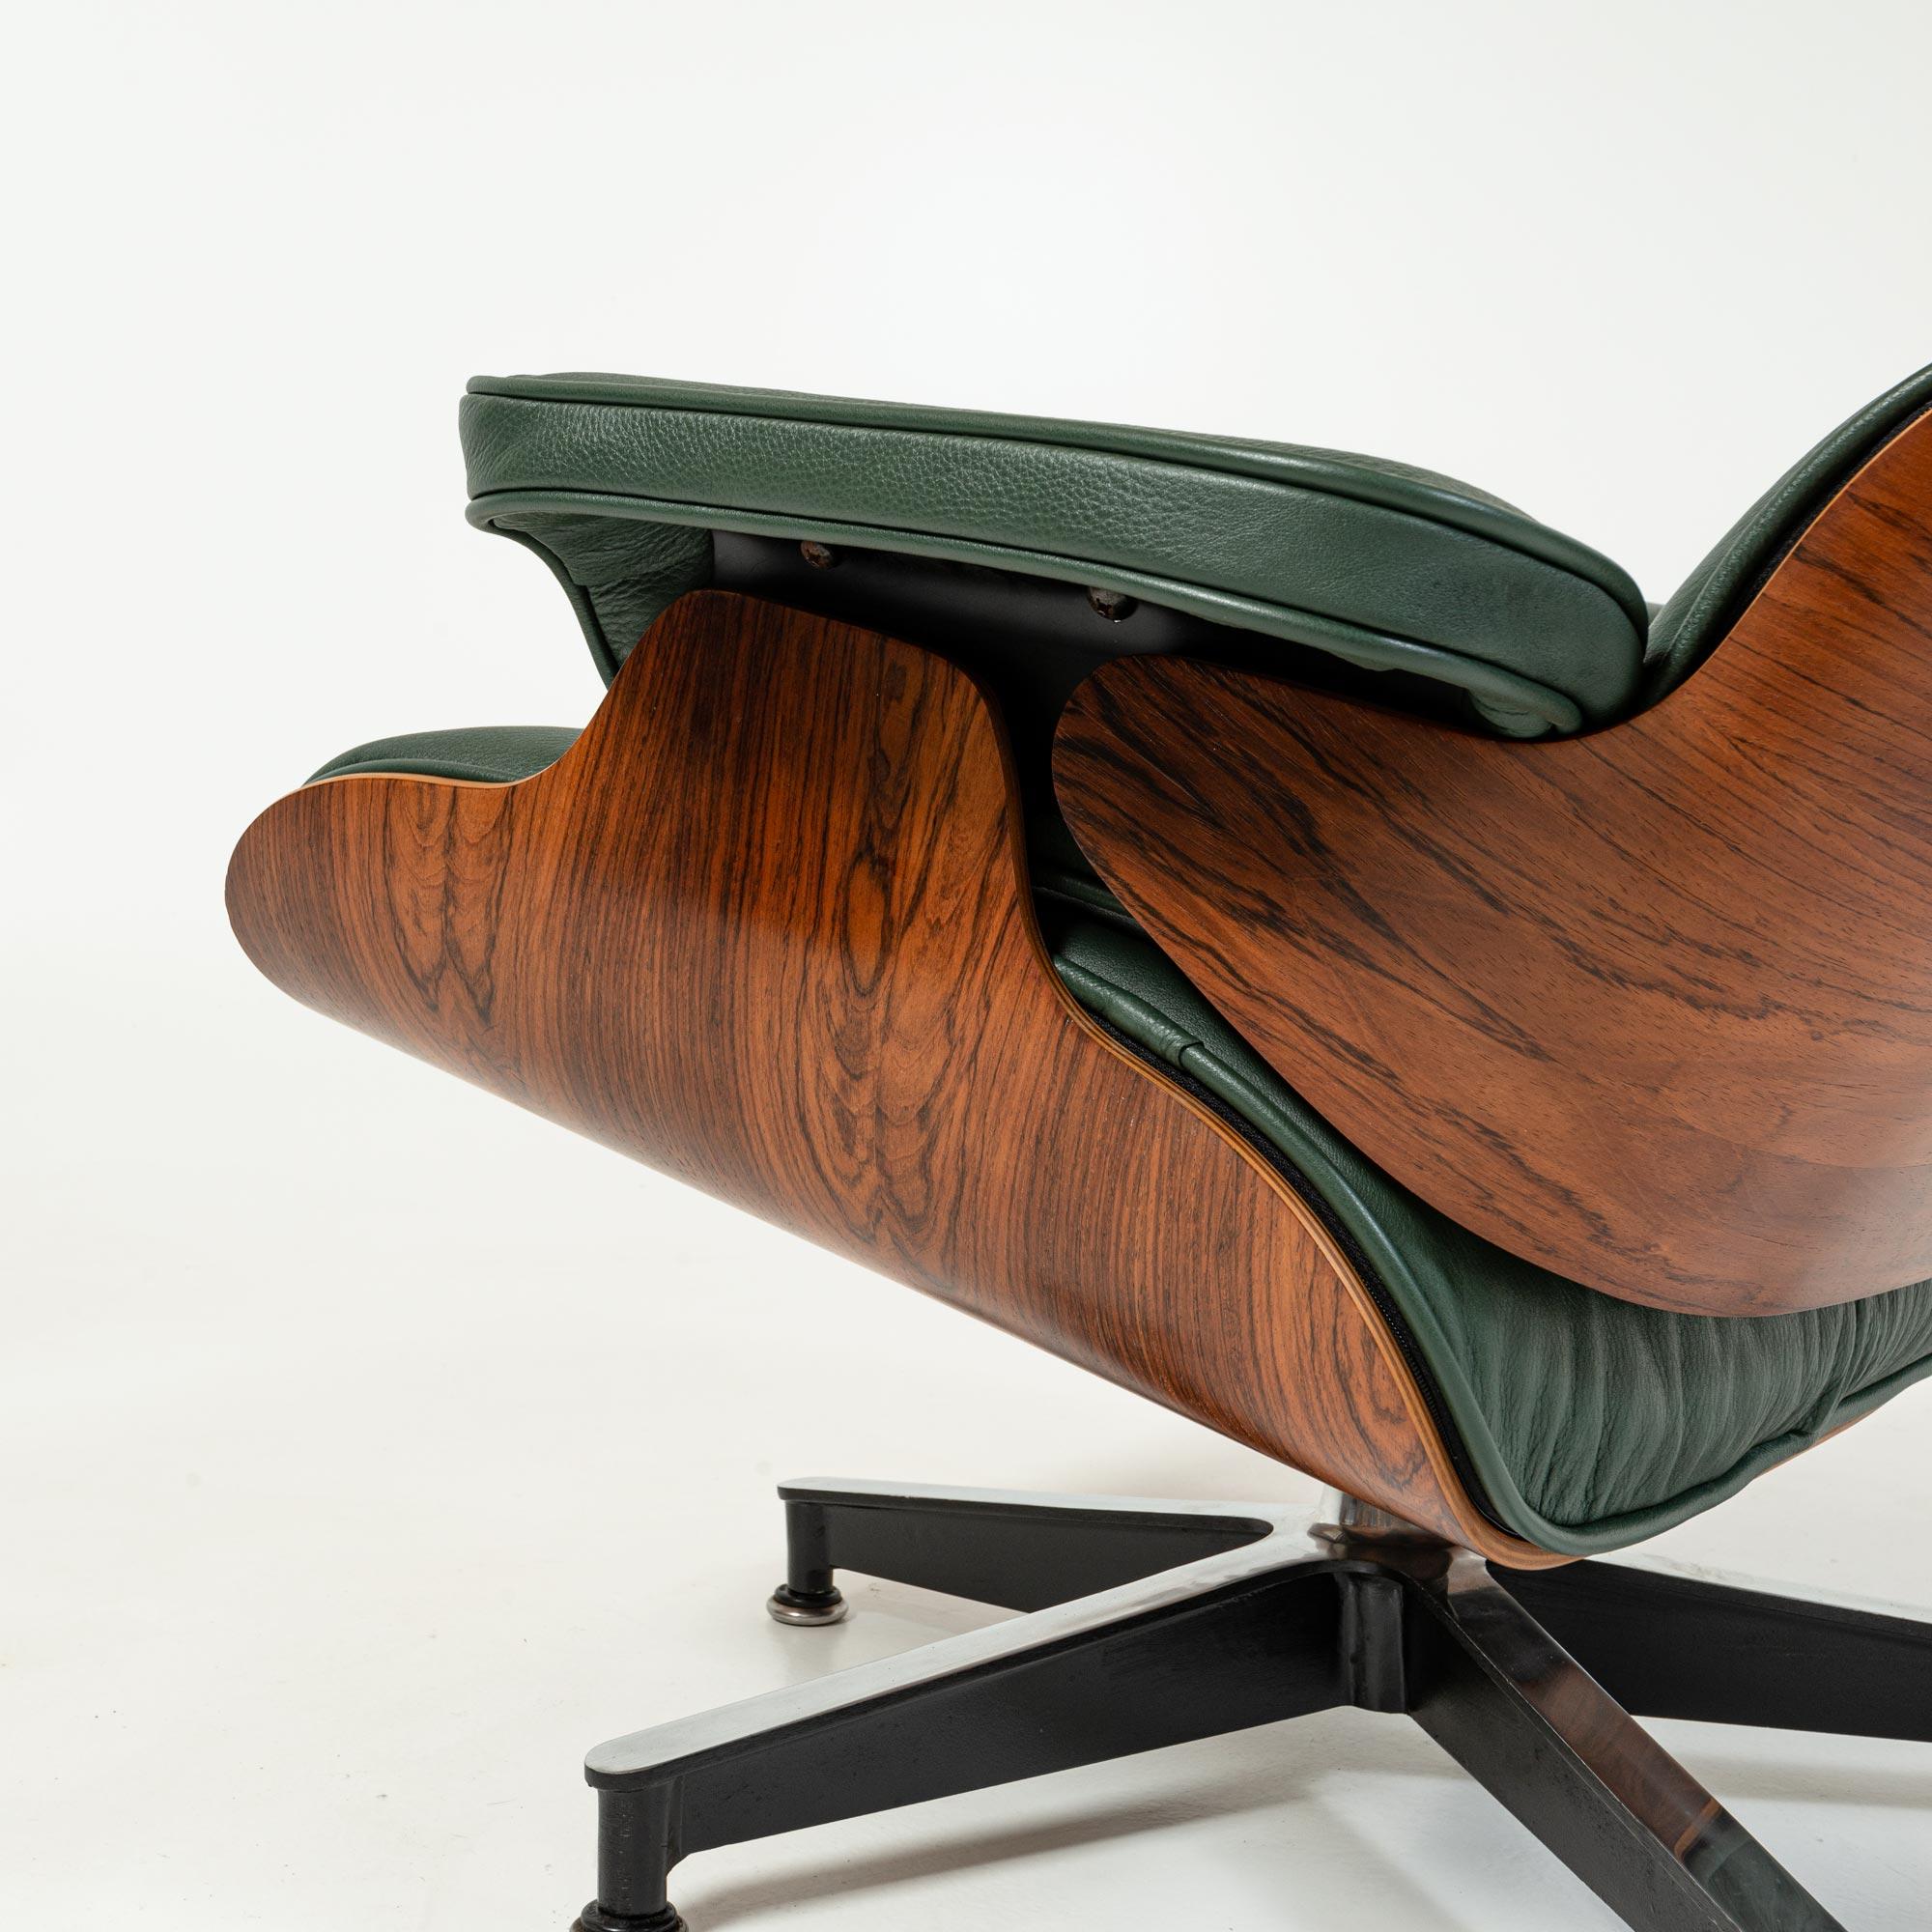 American 3rd Gen Eames Lounge Chair 670-671 in Elmo Baltique Forest Green Leather